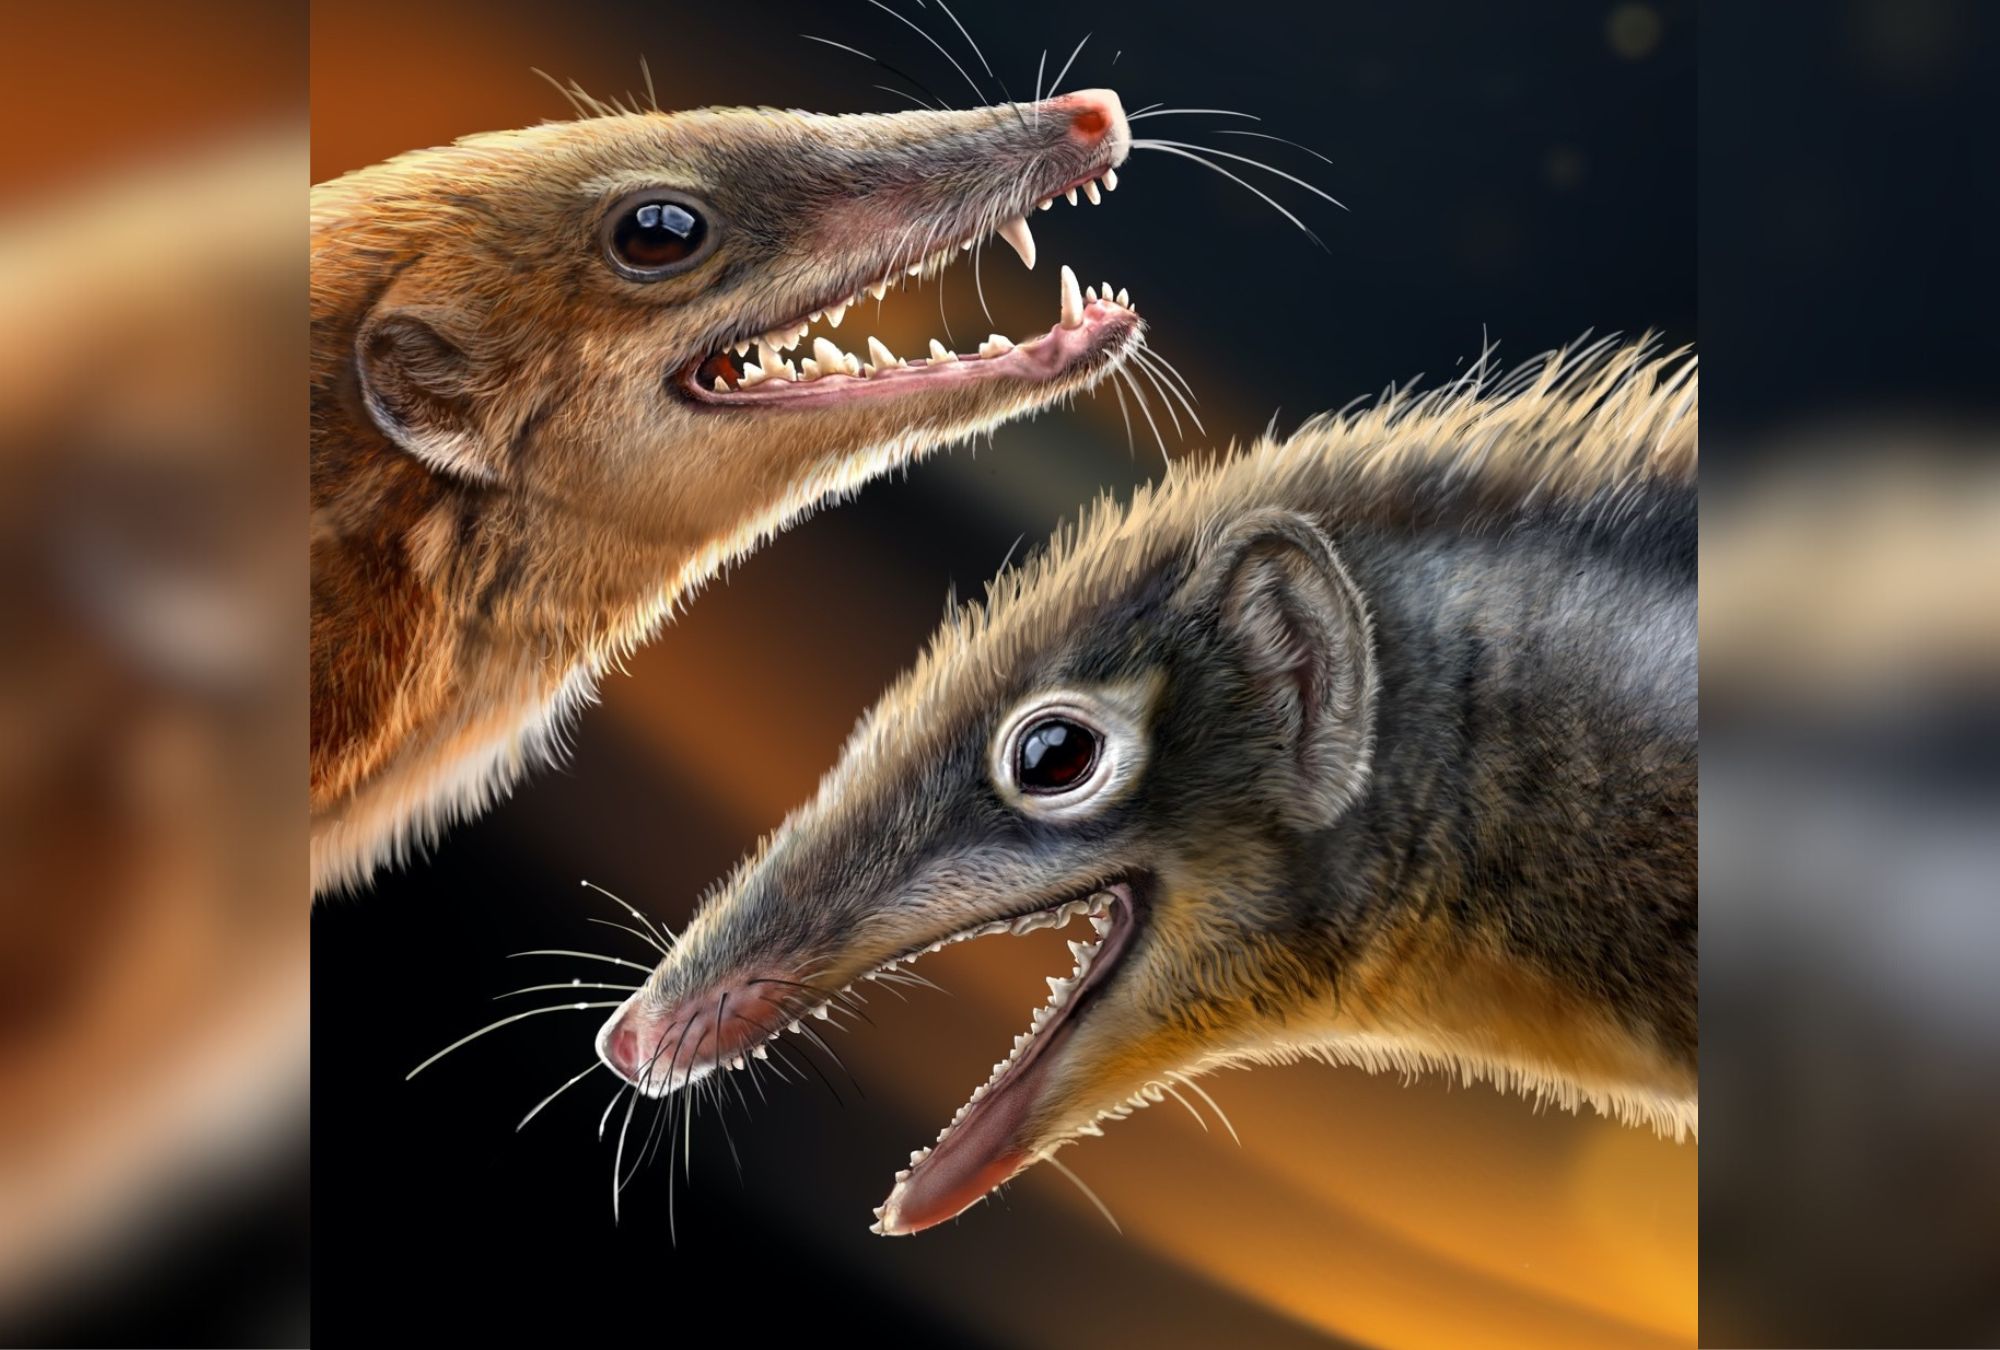 Discovery of Jurassic fossils leads to new theory of mammals